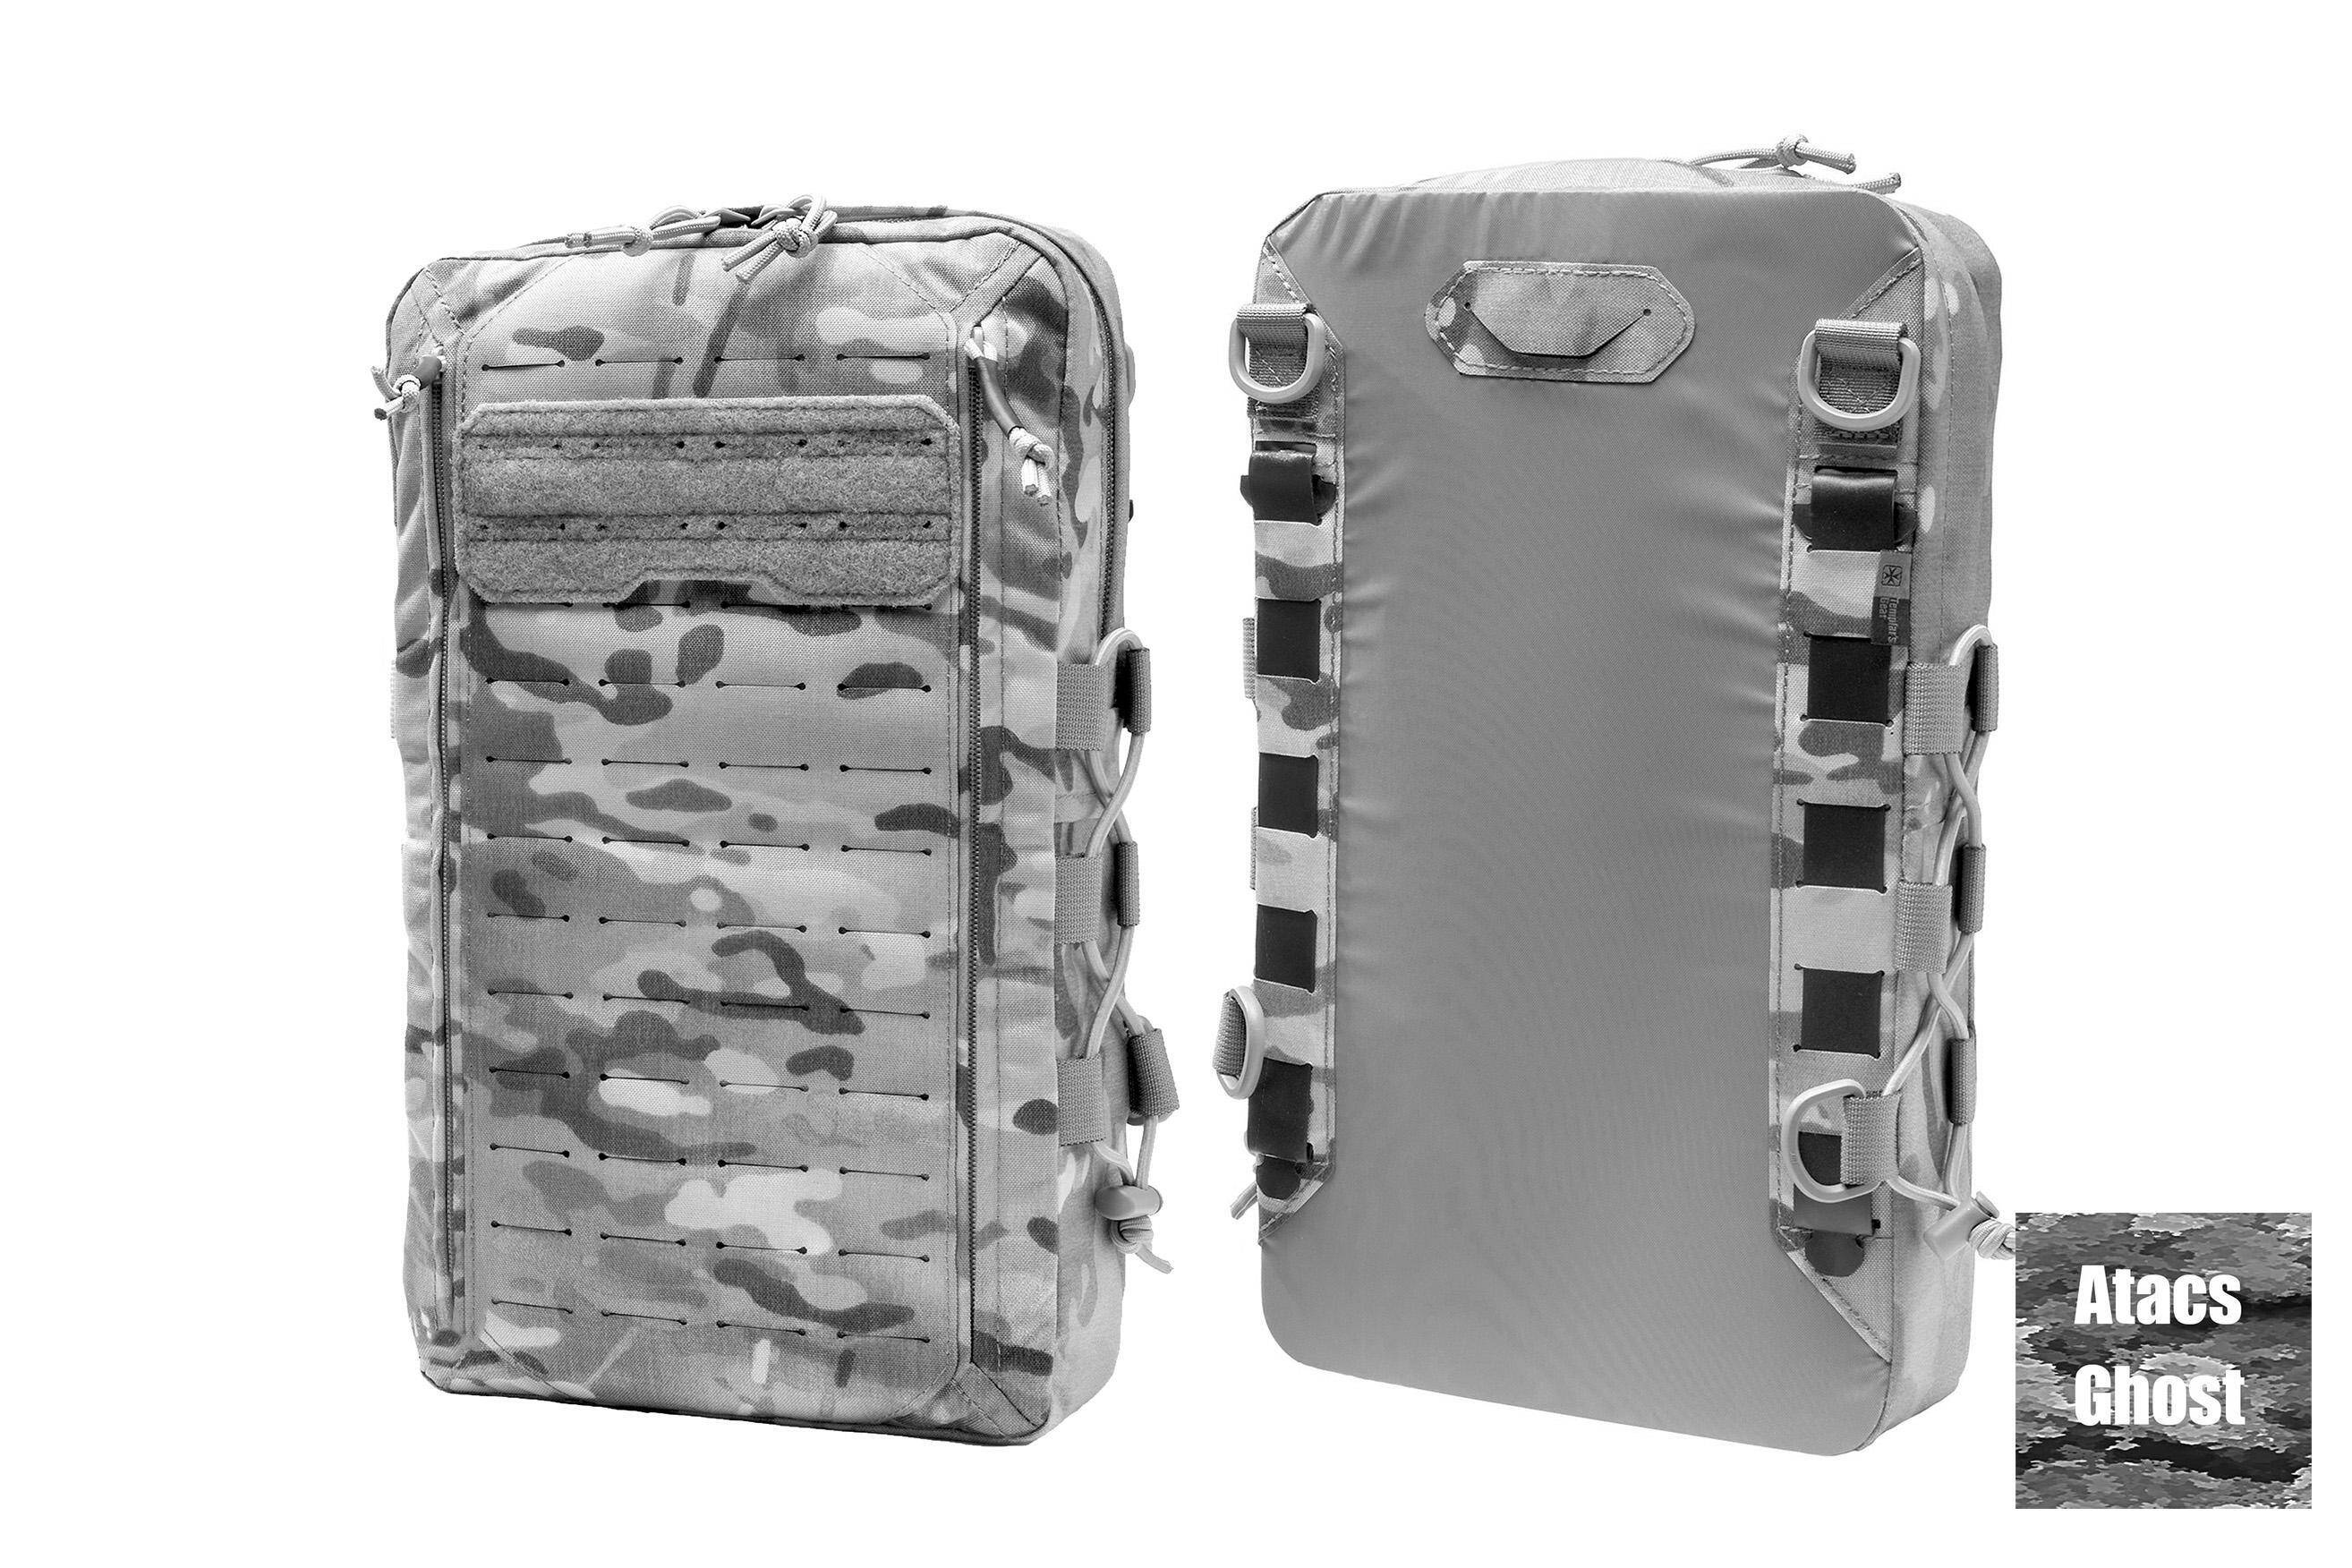 TG-HP Vest Pack H2 LARGE Atacs Ghost